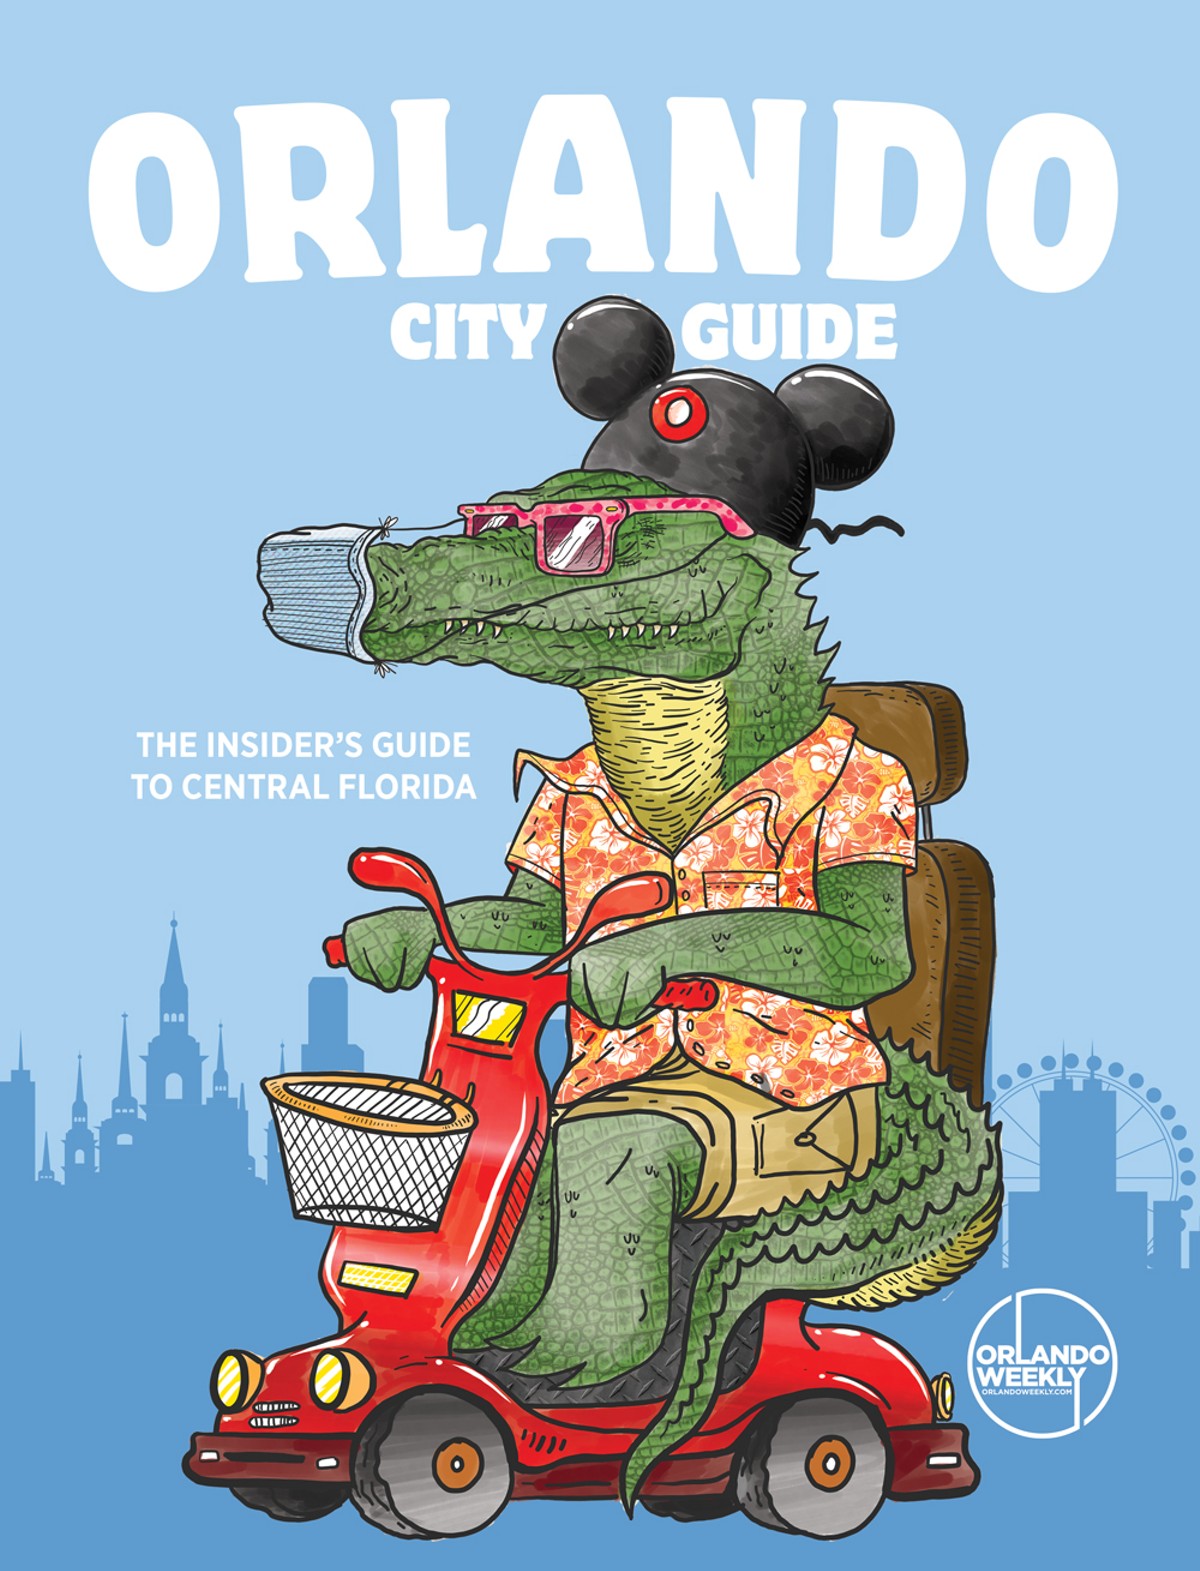 Welcome to the 2020 Orlando Weekly City Guide